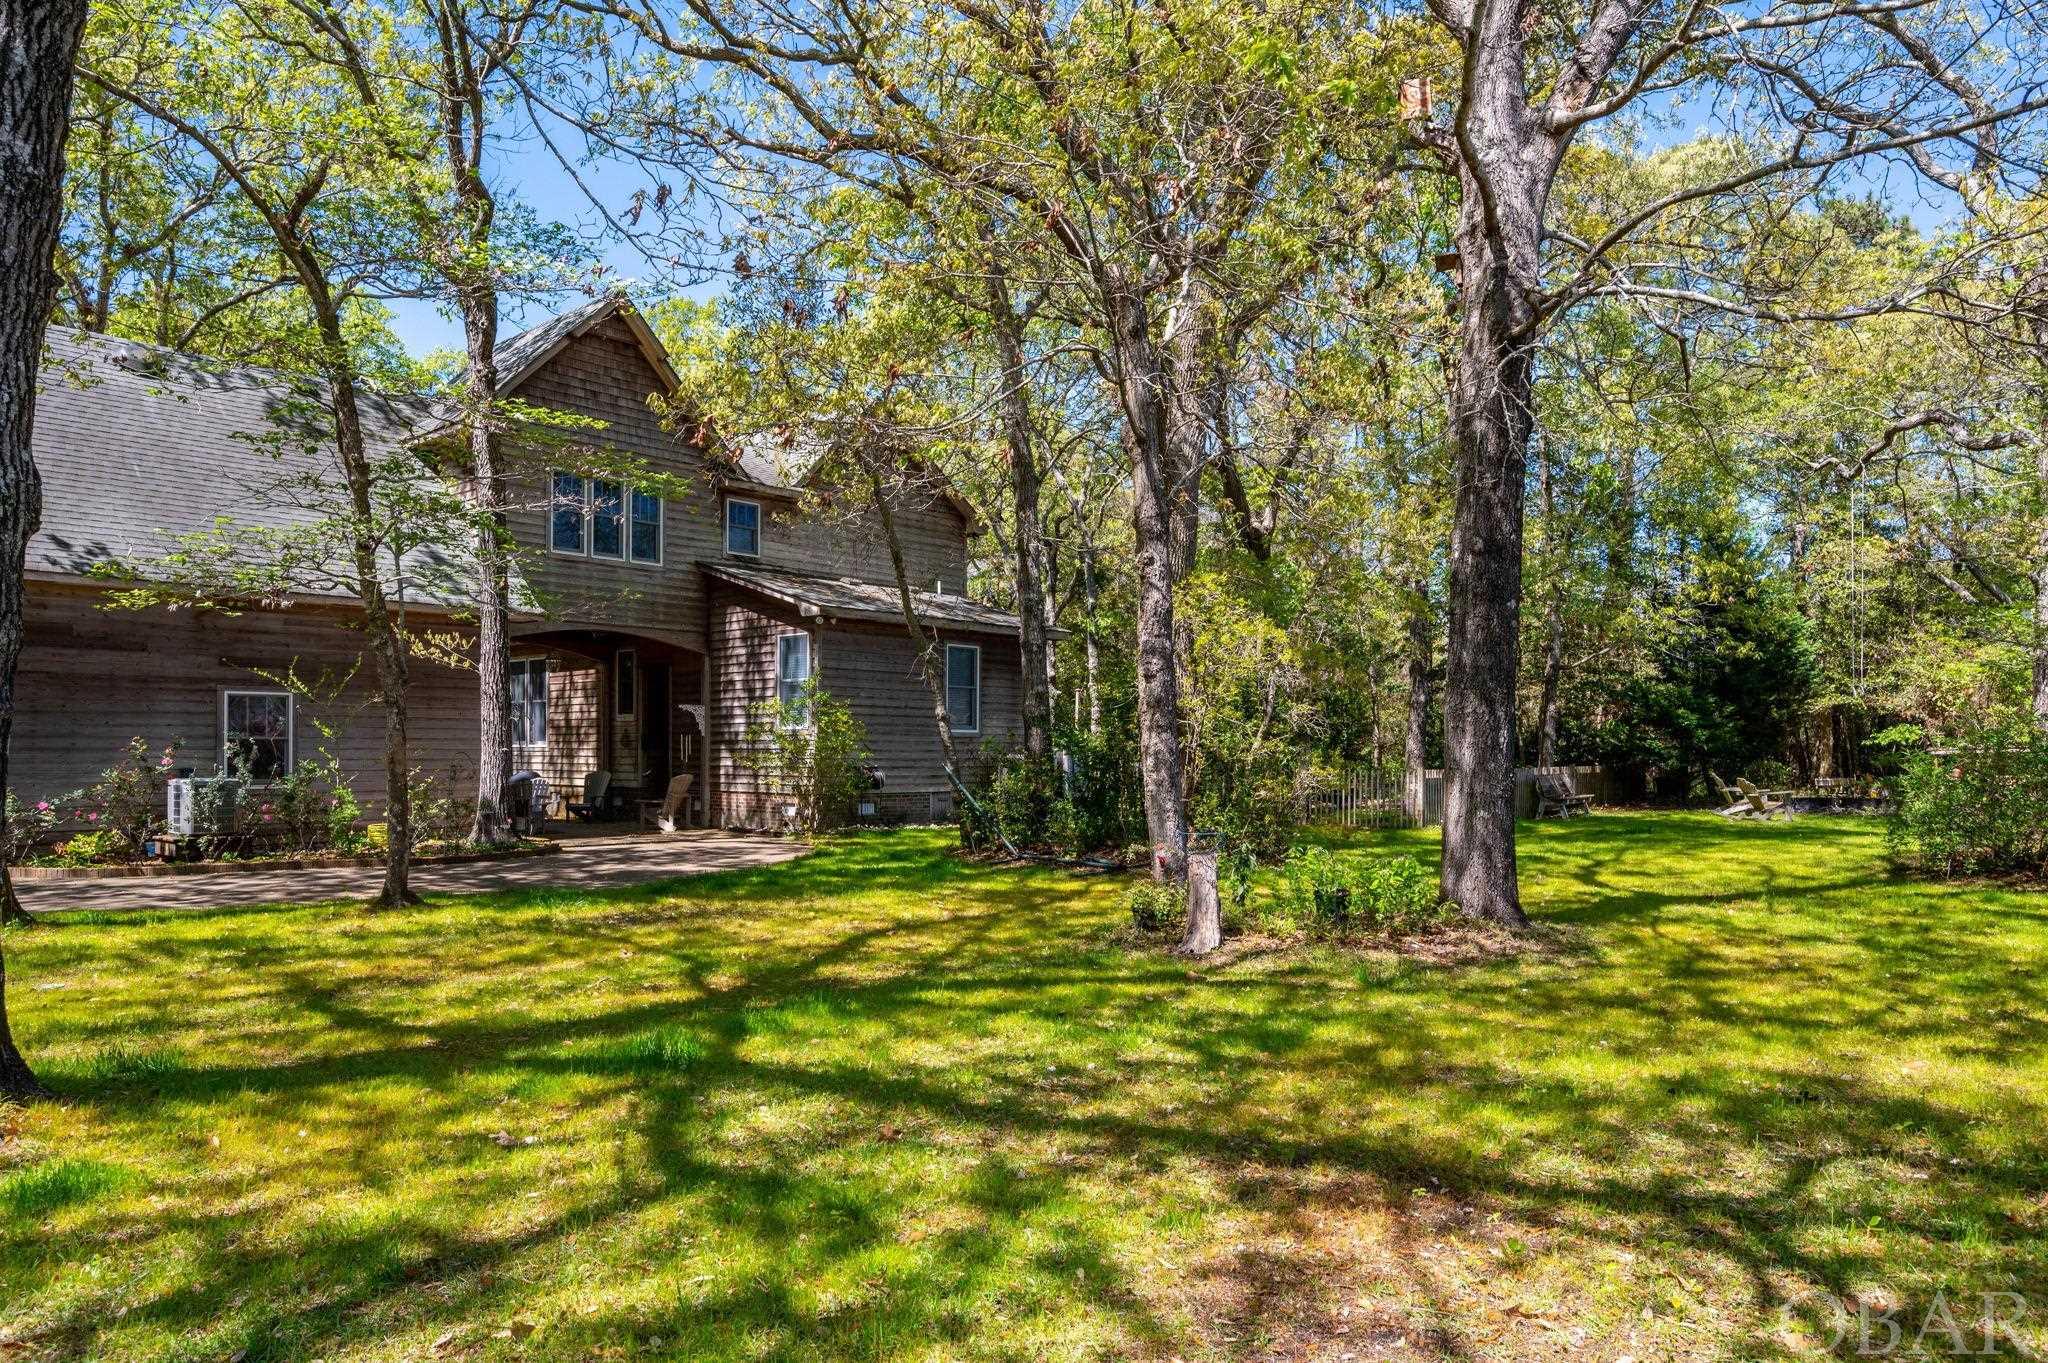 102 Canopy Lane, Manteo, NC 27954, 4 Bedrooms Bedrooms, ,3 BathroomsBathrooms,Residential,For sale,Canopy Lane,124877